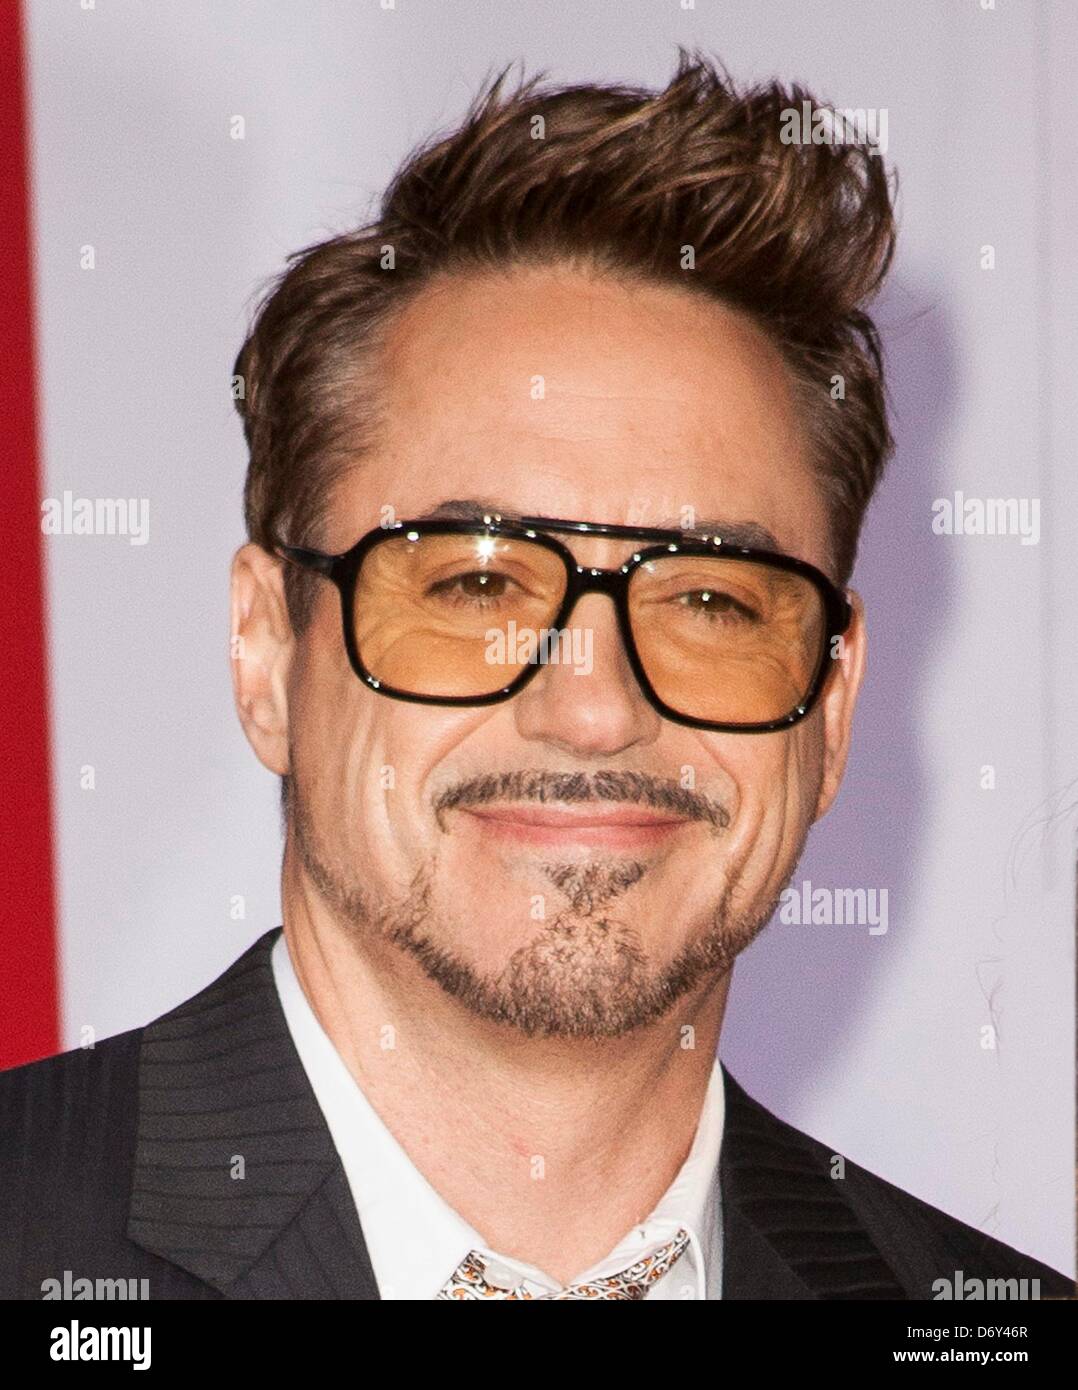 Los Angeles, USA. 24th April, 2013. Robert Downey Jr. at arrivals for IRON MAN 3 Premiere, El Capitan Theatre, Los Angeles, CA April 24, 2013. Photo By: Emiley Schweich/Everett Collection/Alamy Live News Stock Photo